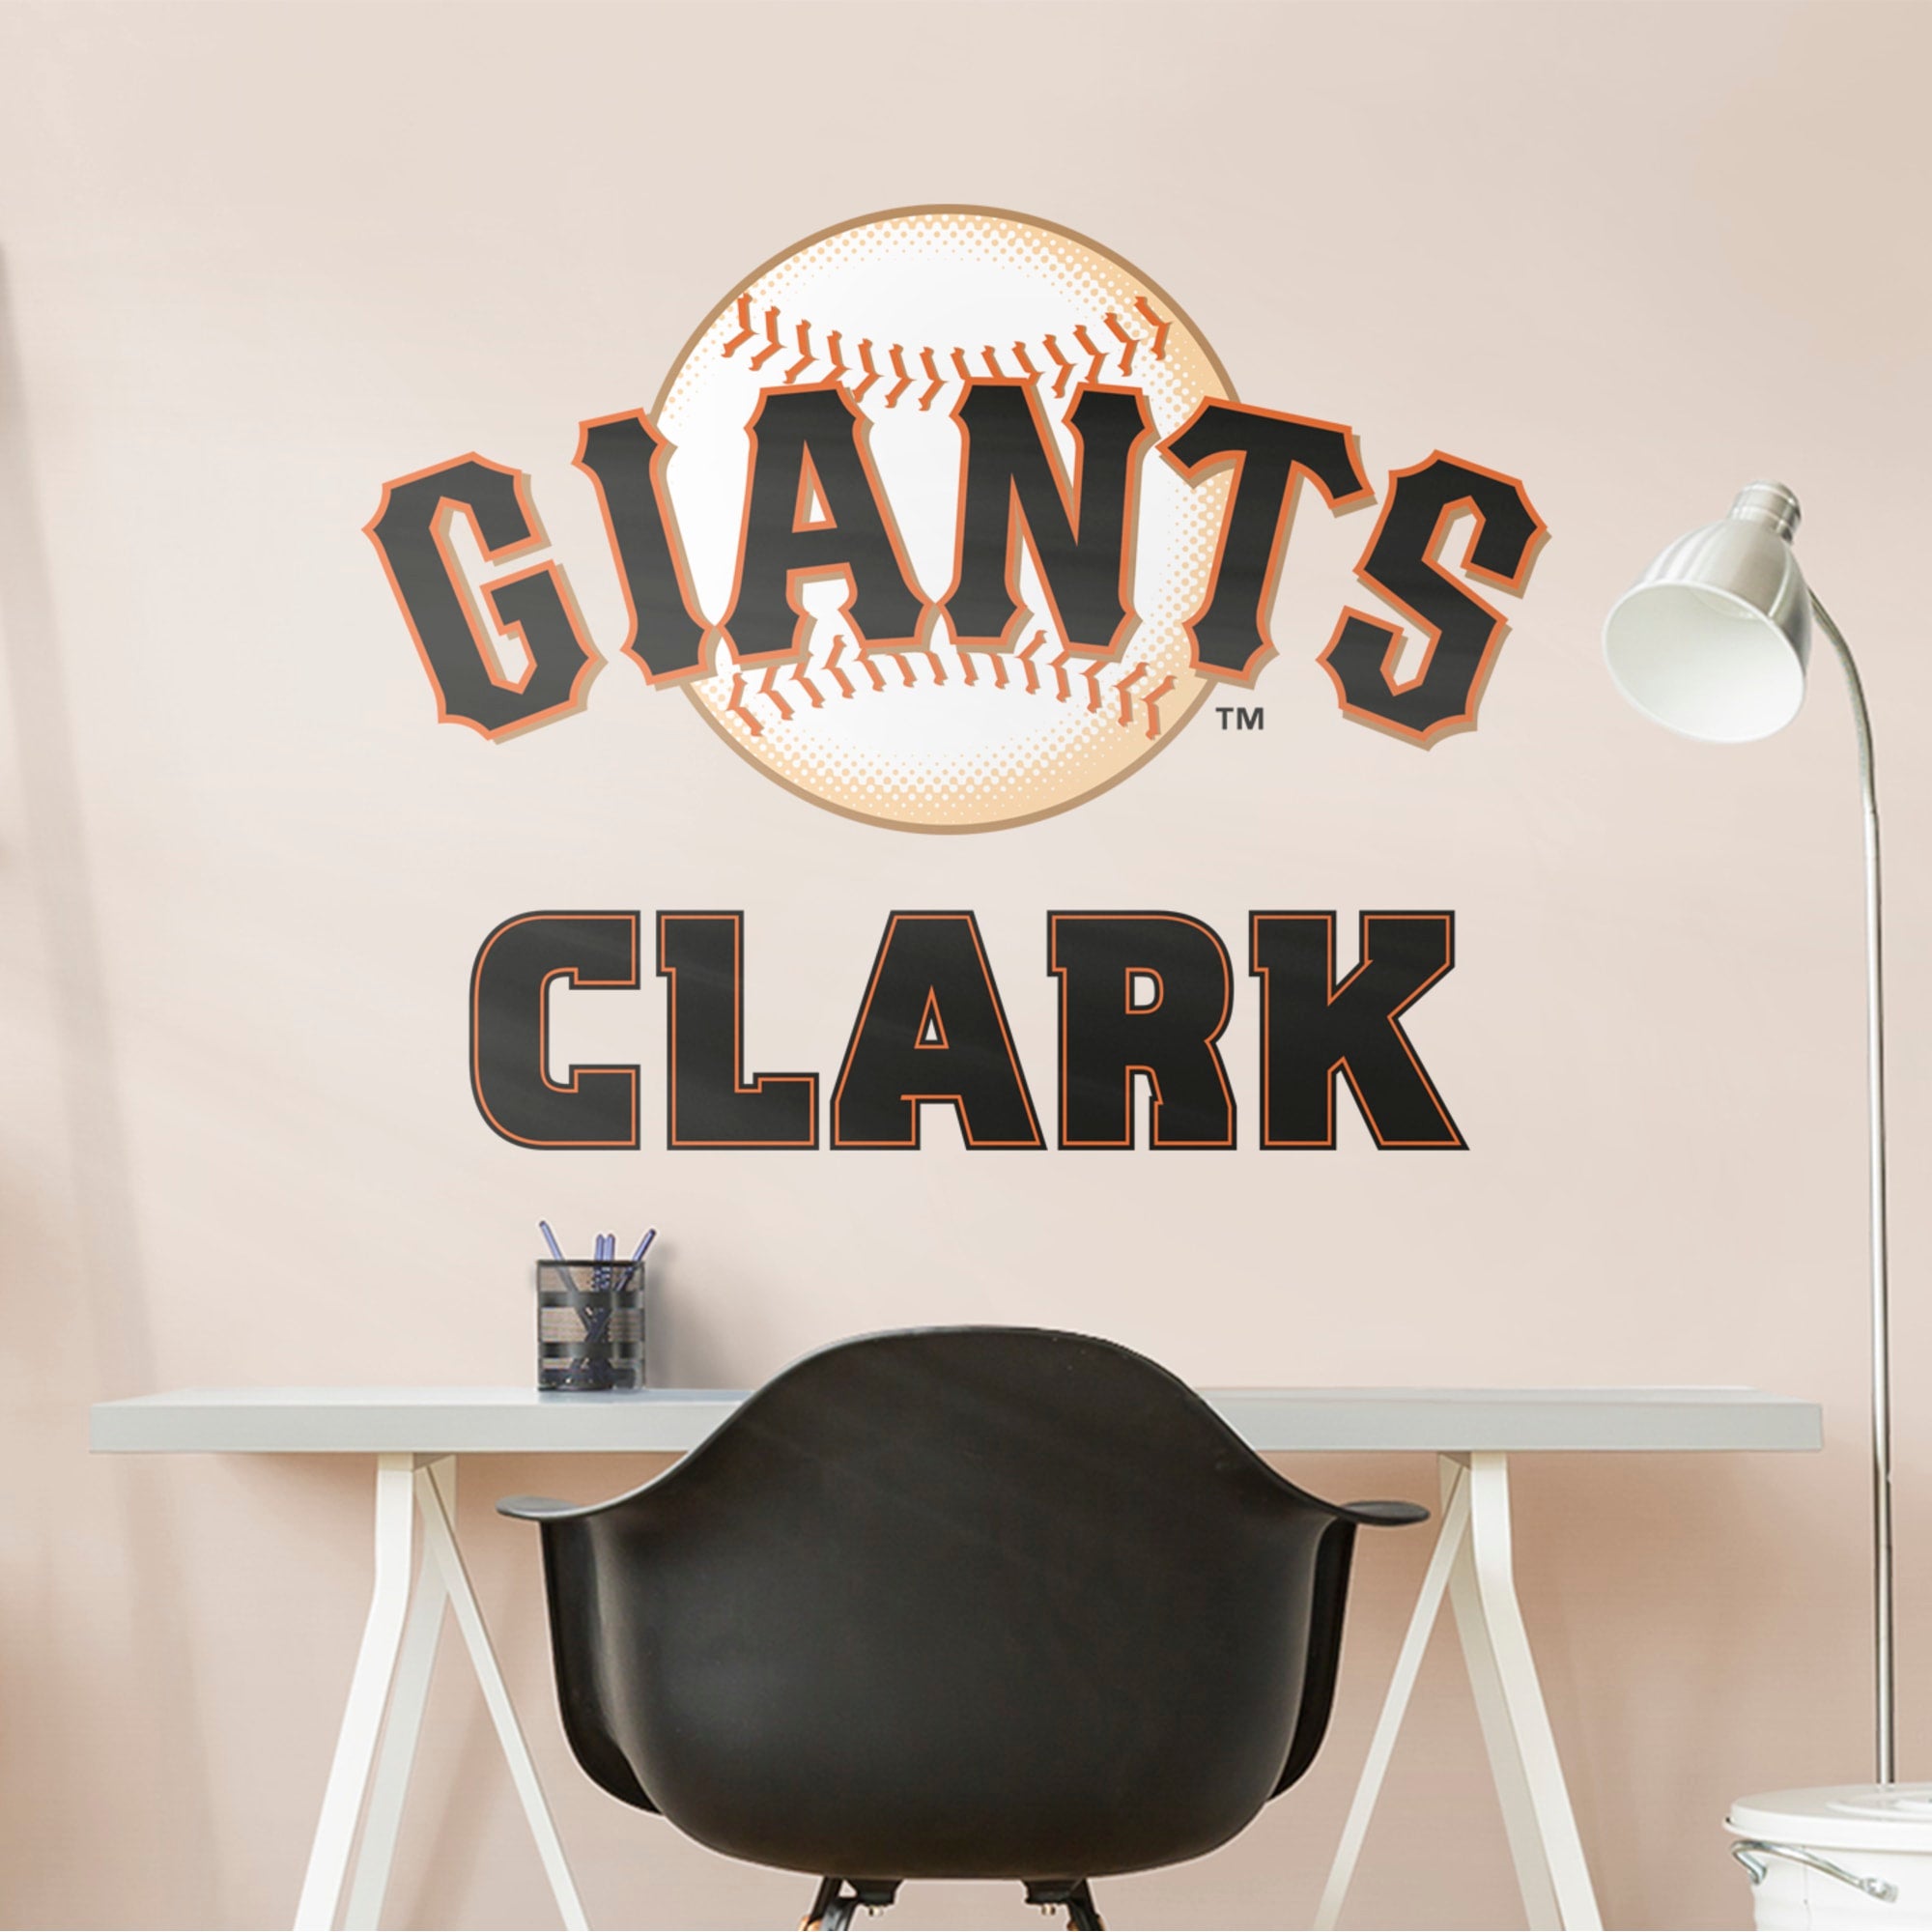 San Francisco Giants: Stacked Personalized Name - Officially Licensed MLB Transfer Decal in Black (52"W x 39.5"H) by Fathead | V